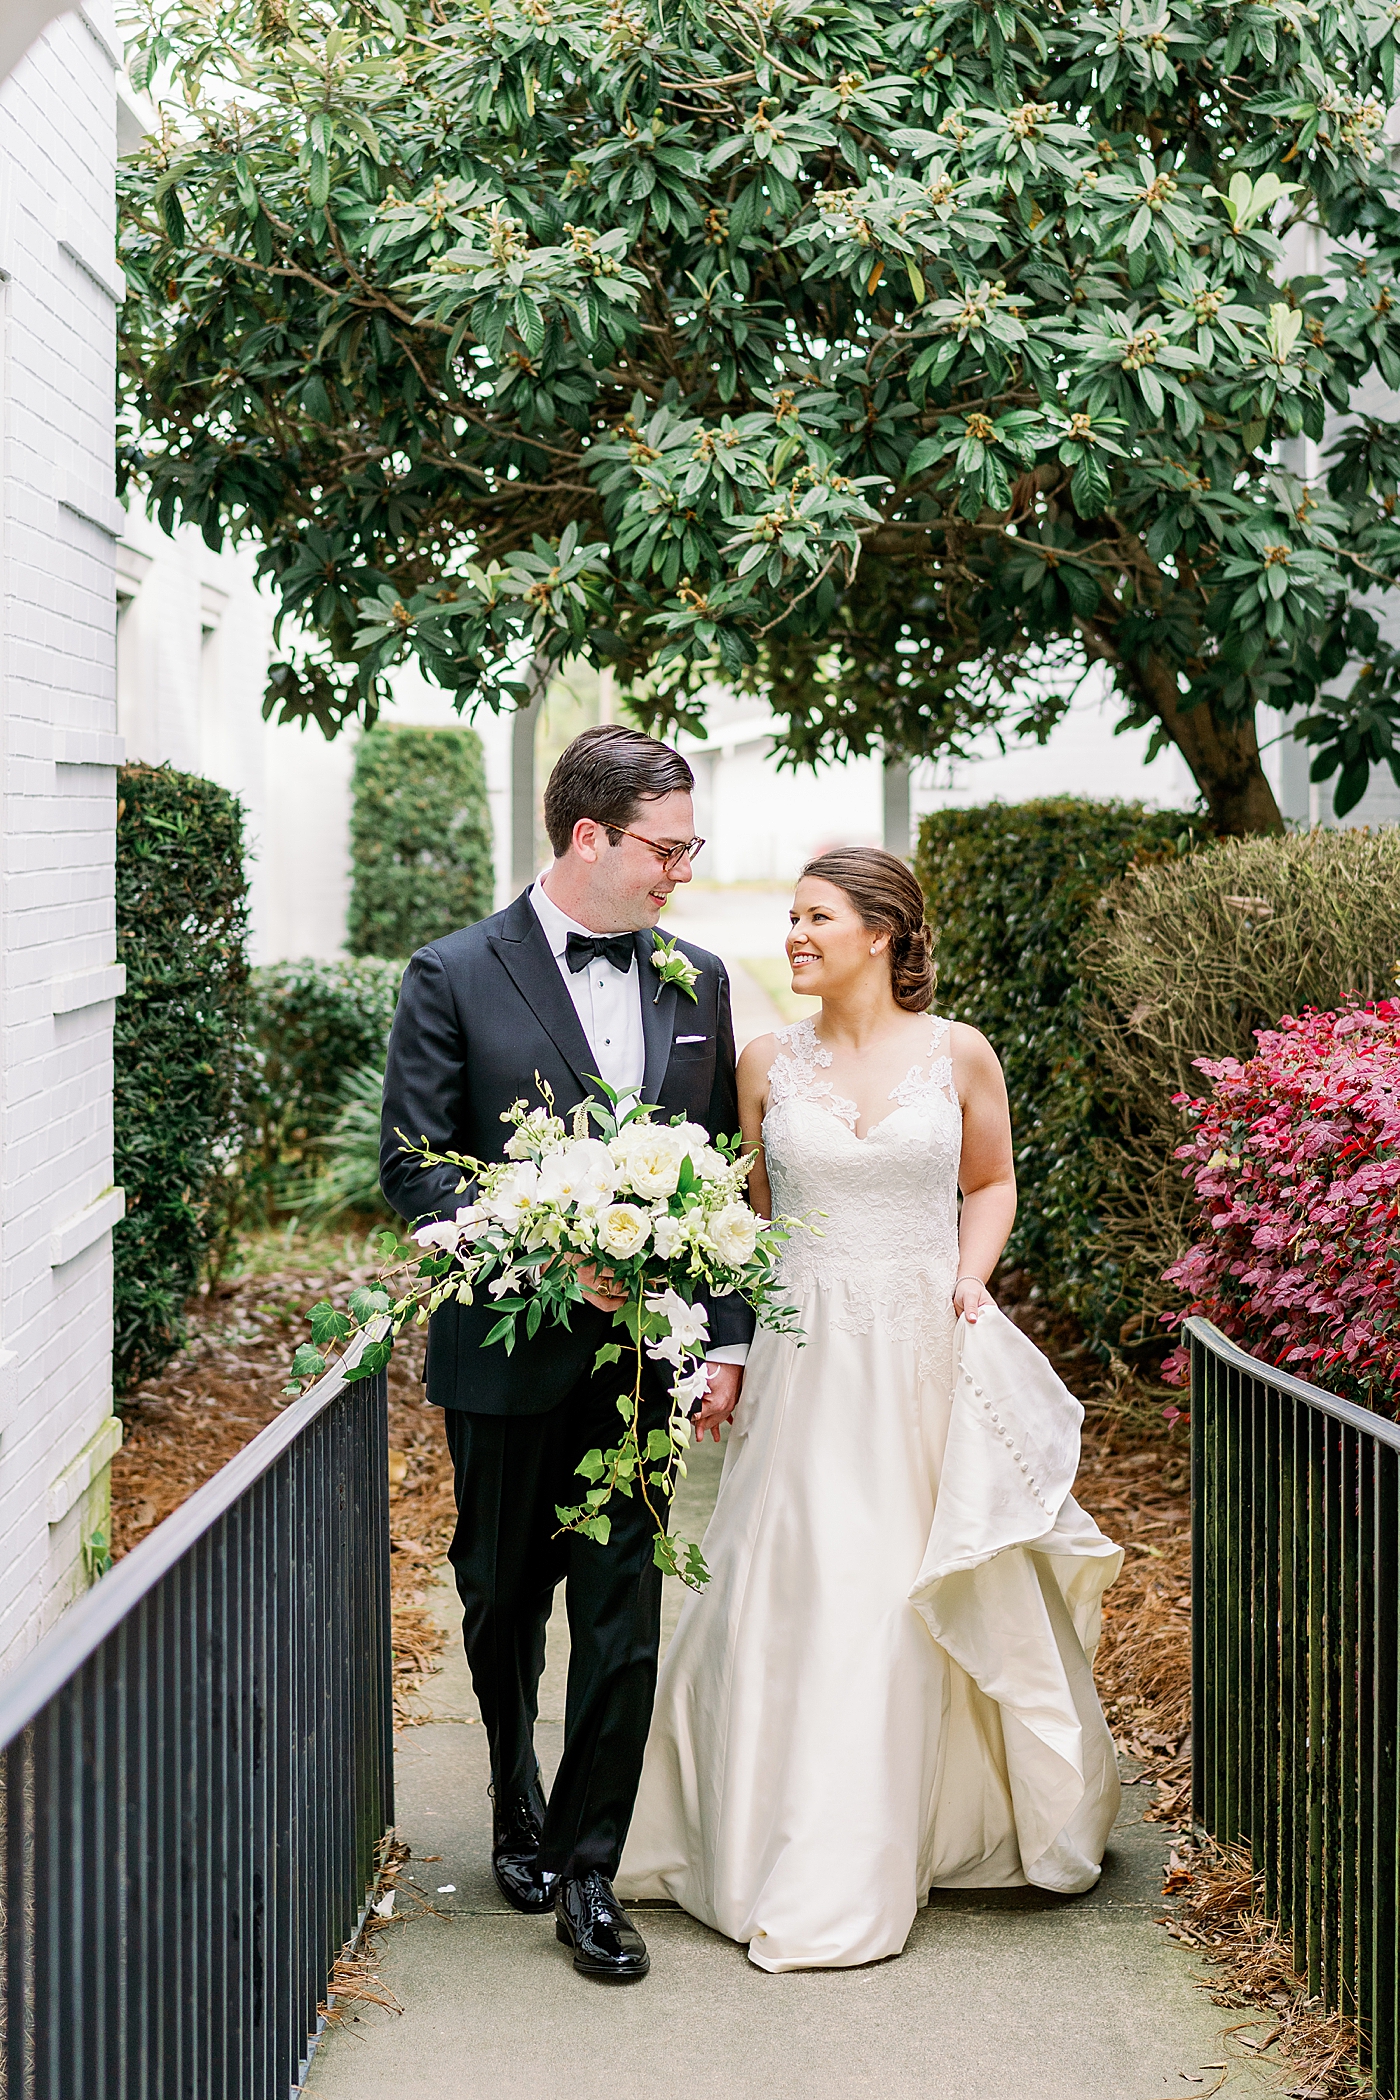 Bride and groom walking together during their Timeless Country Club Wedding | Photo by Annie Laura Photography